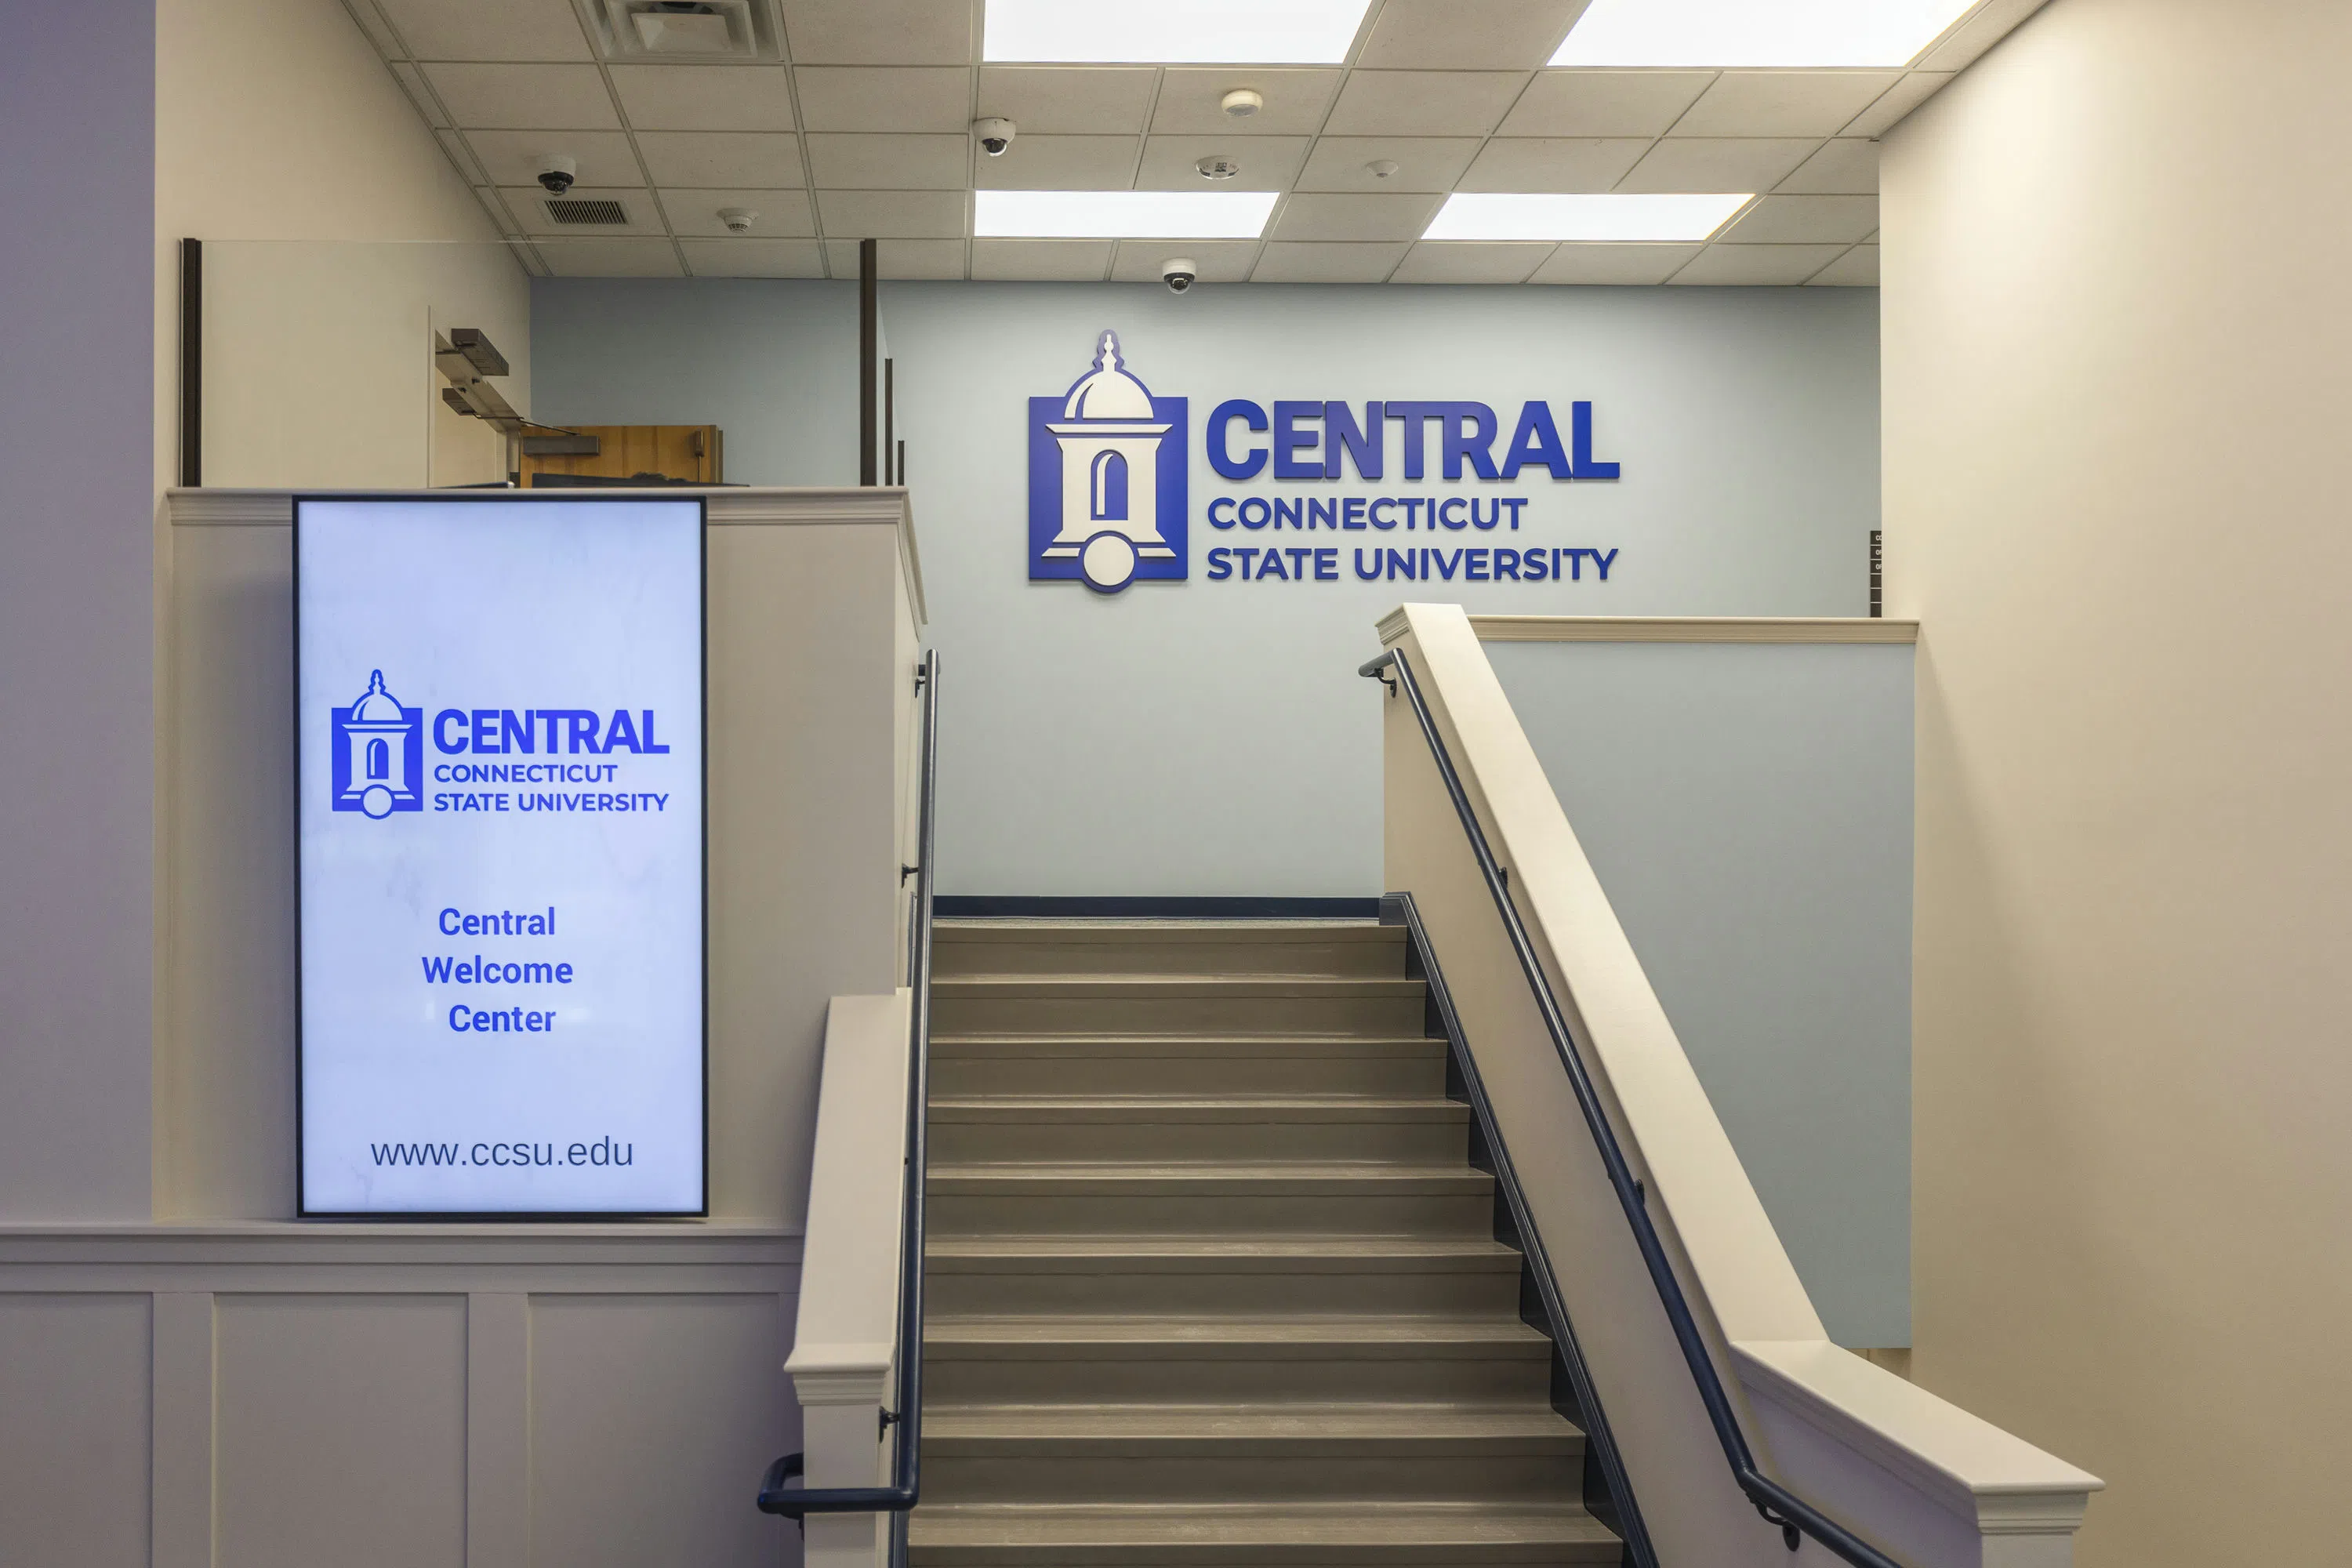 Interior of Central's Welcome Center